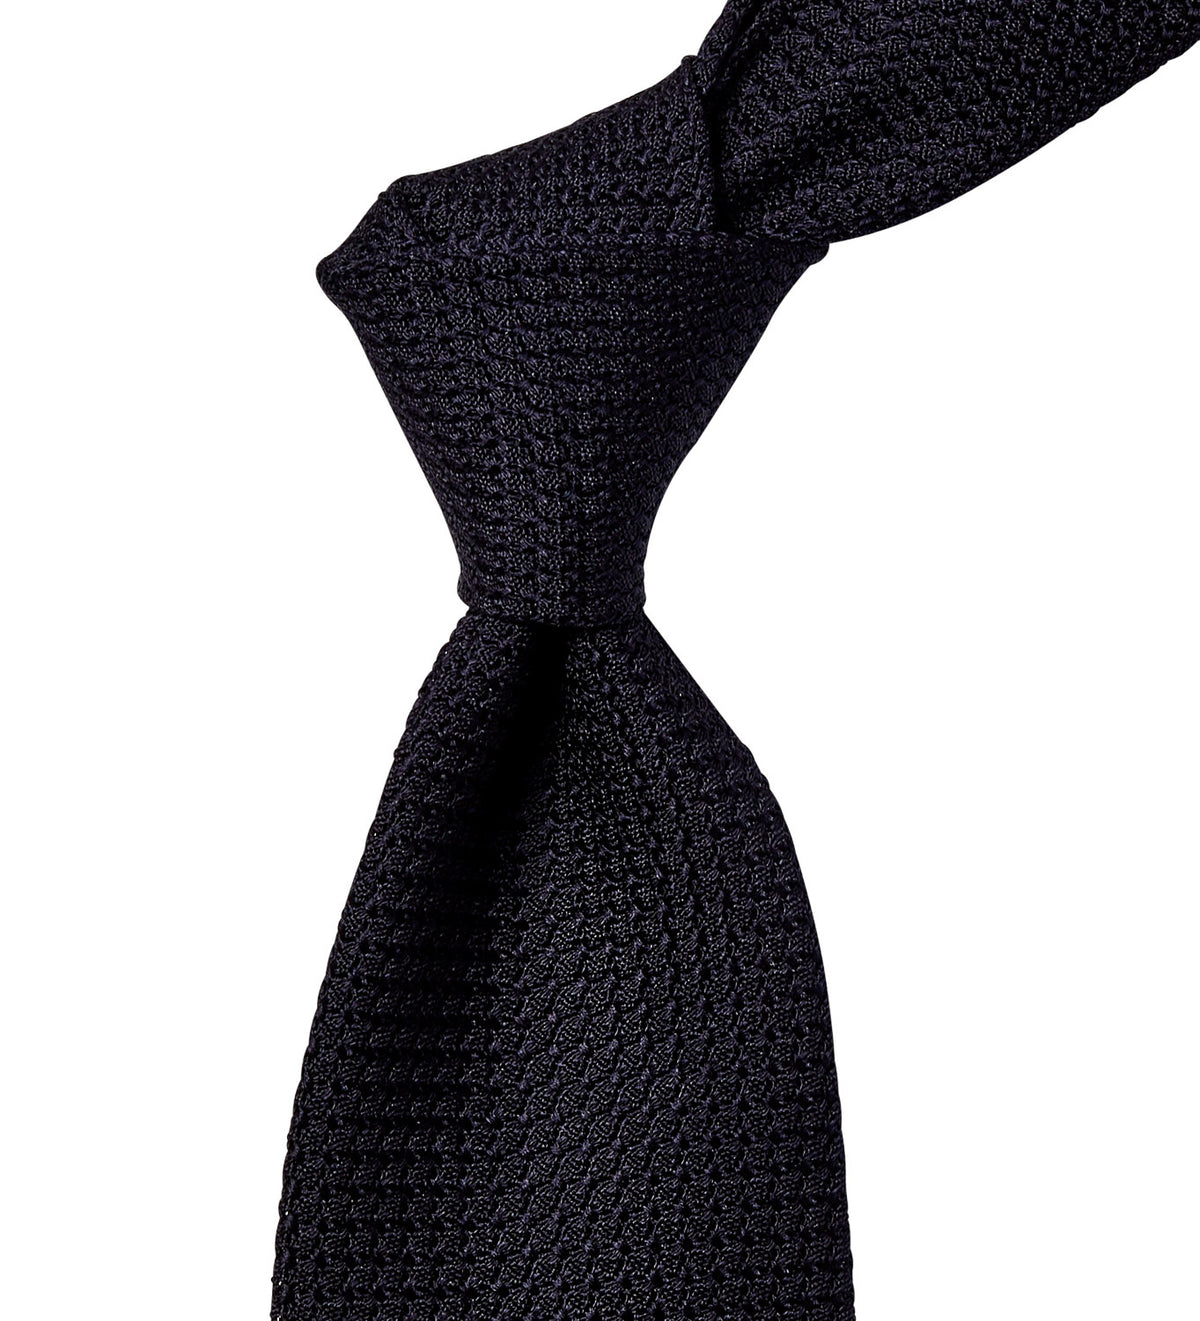 A Sovereign Grade Black Grenadine Grossa Tie on a white background of the highest quality, from KirbyAllison.com.